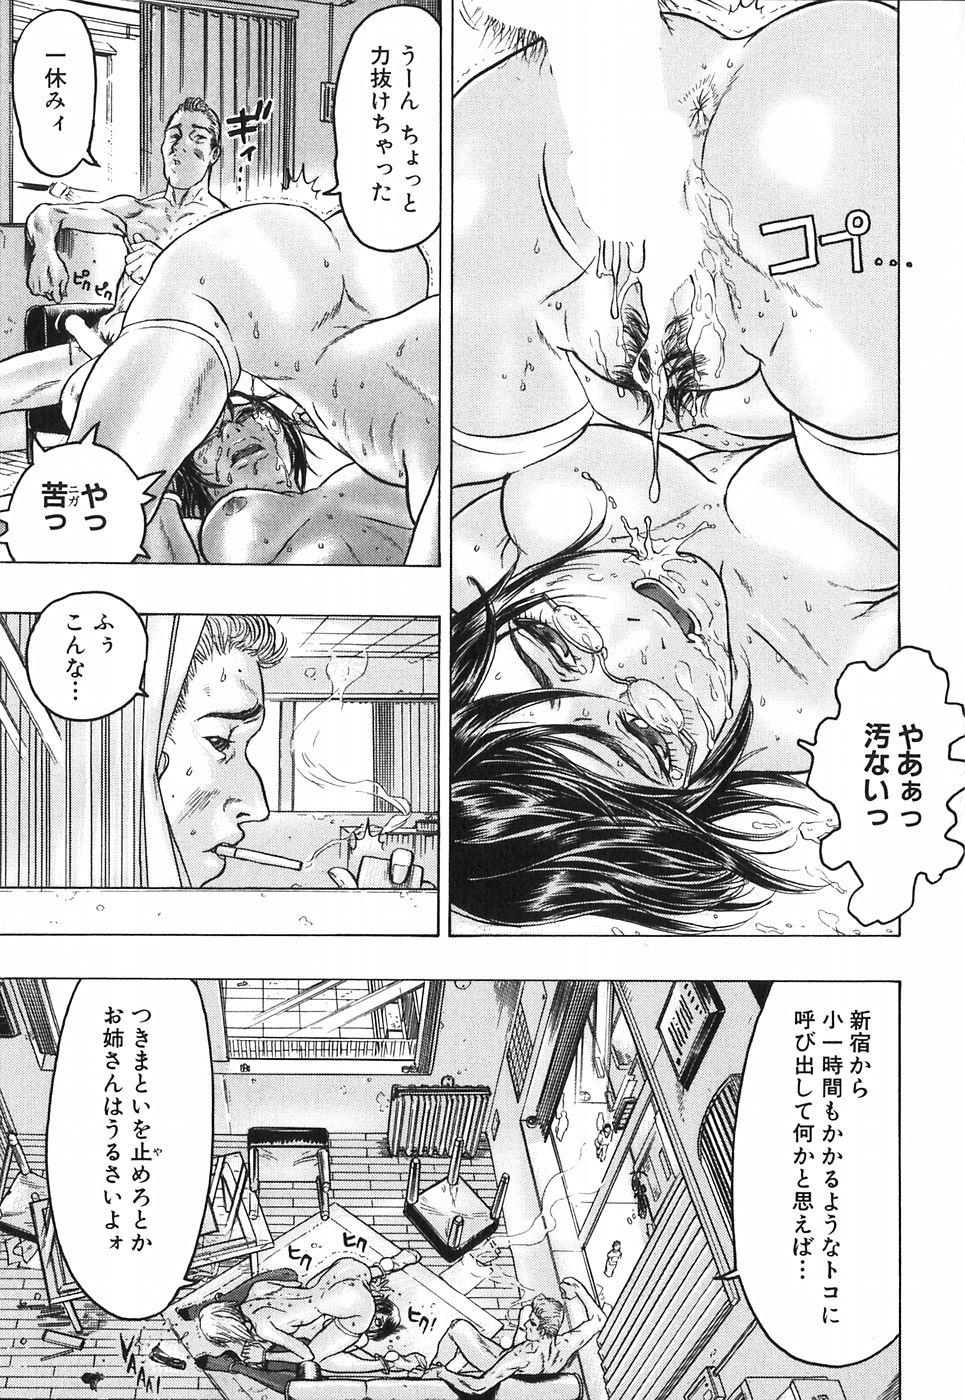 Double Akai Fuku no Onna - The Woman with Red Dress Studs - Page 9